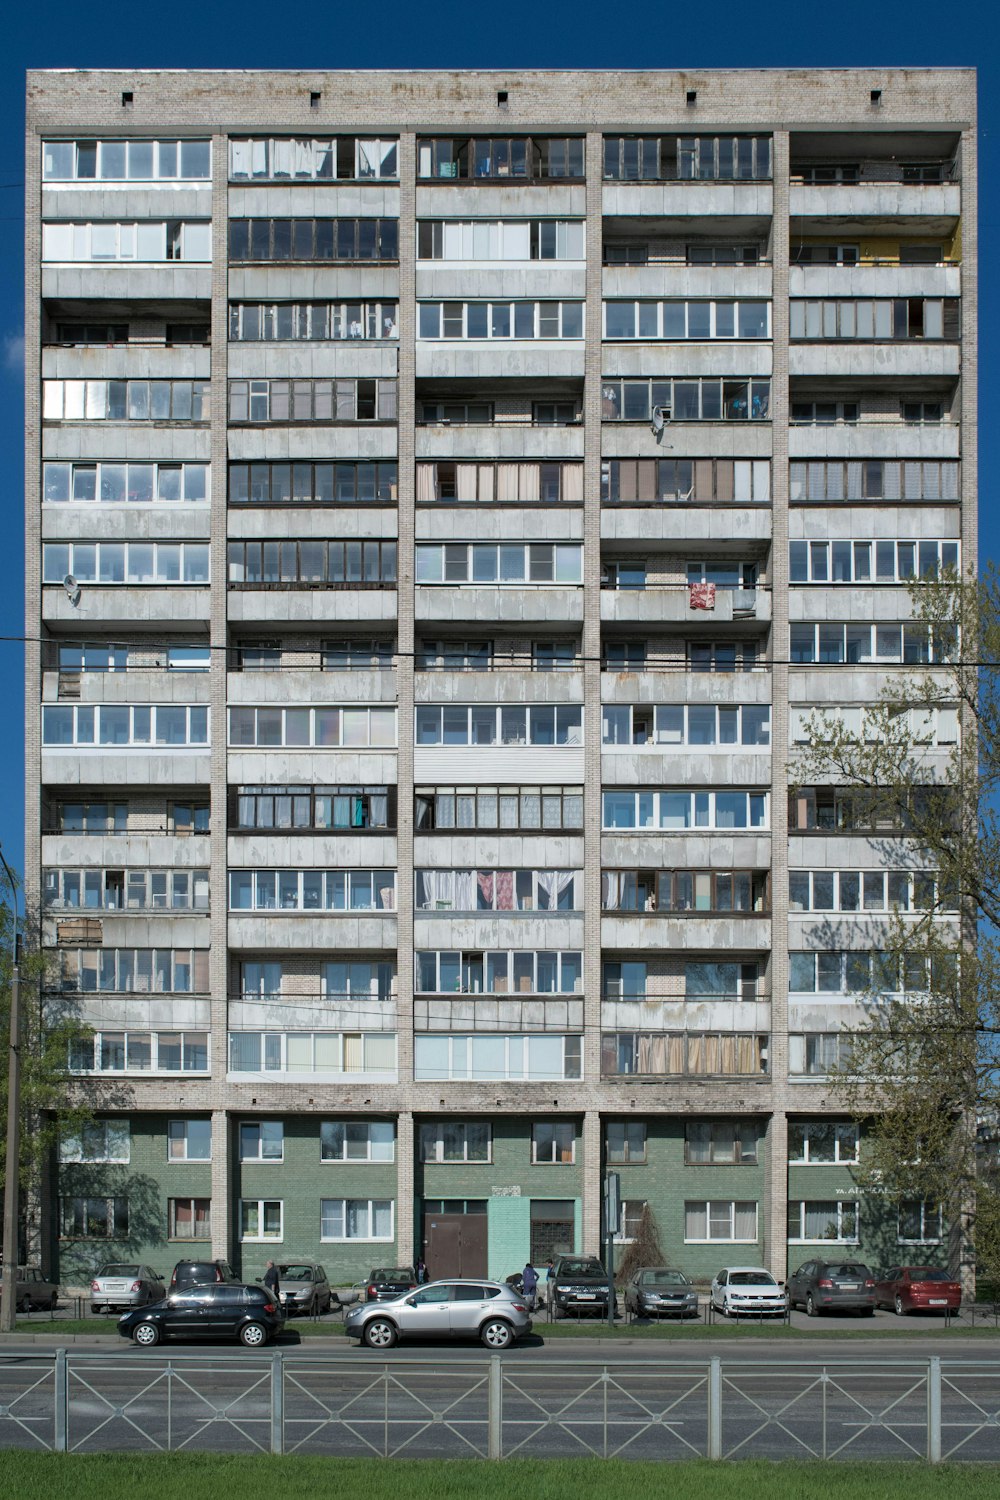 a very tall building with lots of windows and balconies